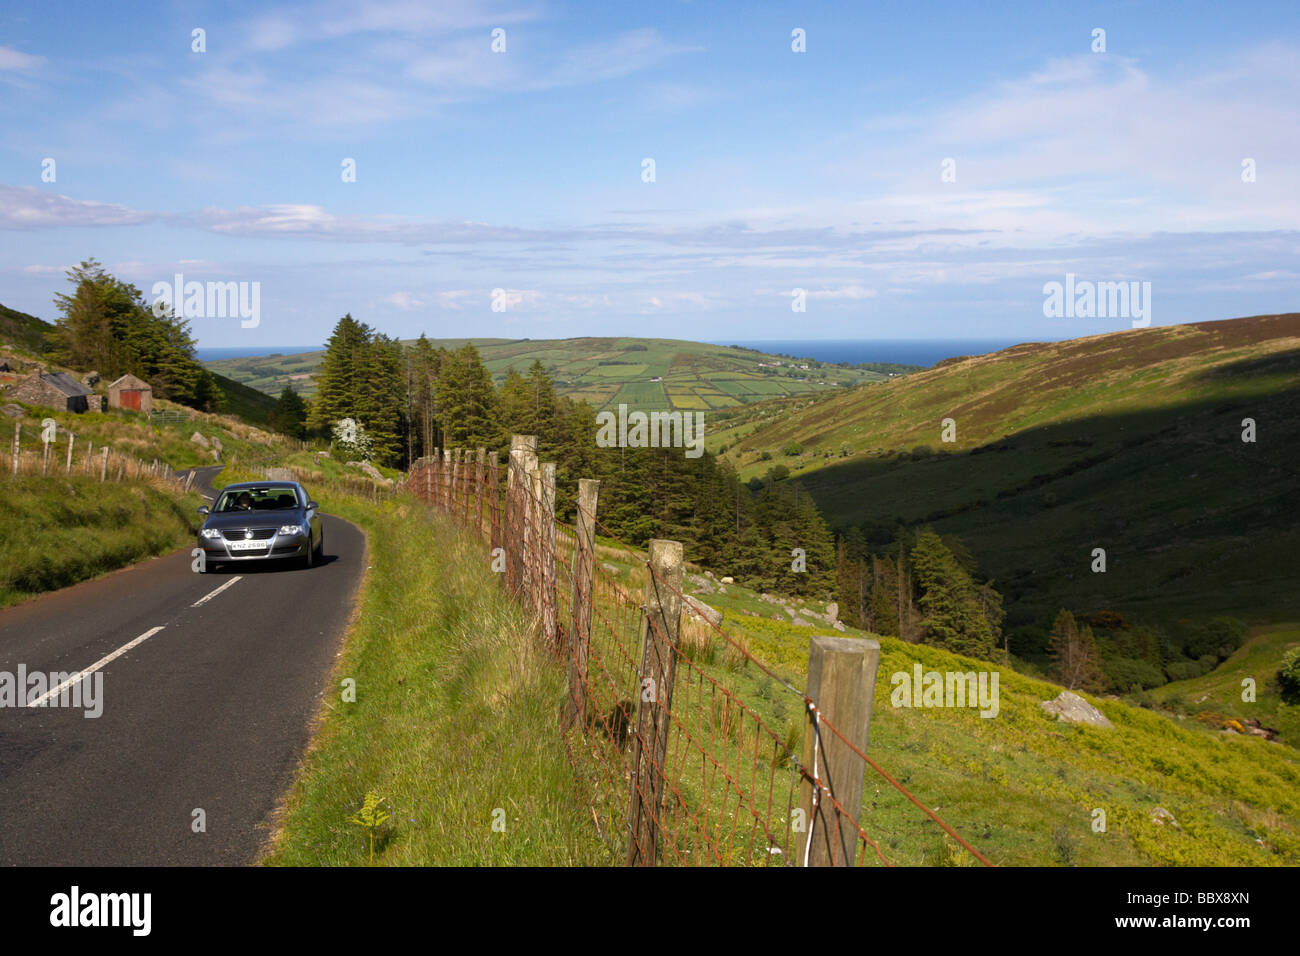 car driving along country mountain road through glenaan scenic route glenaan county antrim northern ireland uk Stock Photo